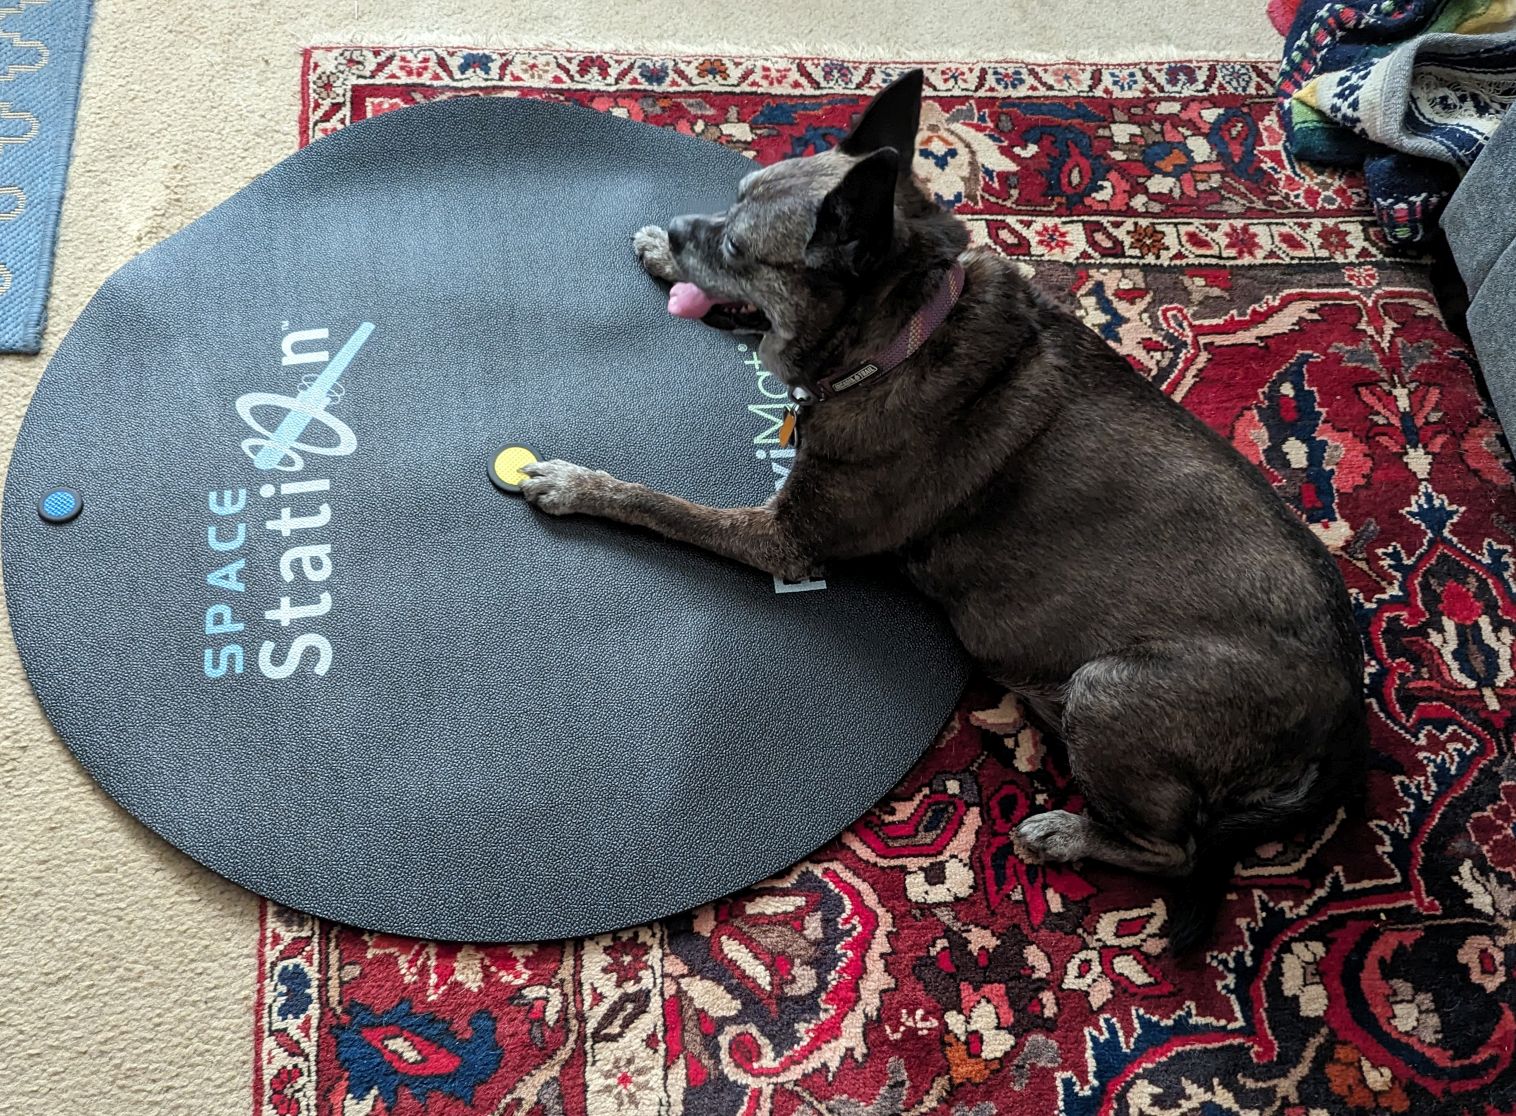 Lola the dog laying on the VR pad I use for my workouts